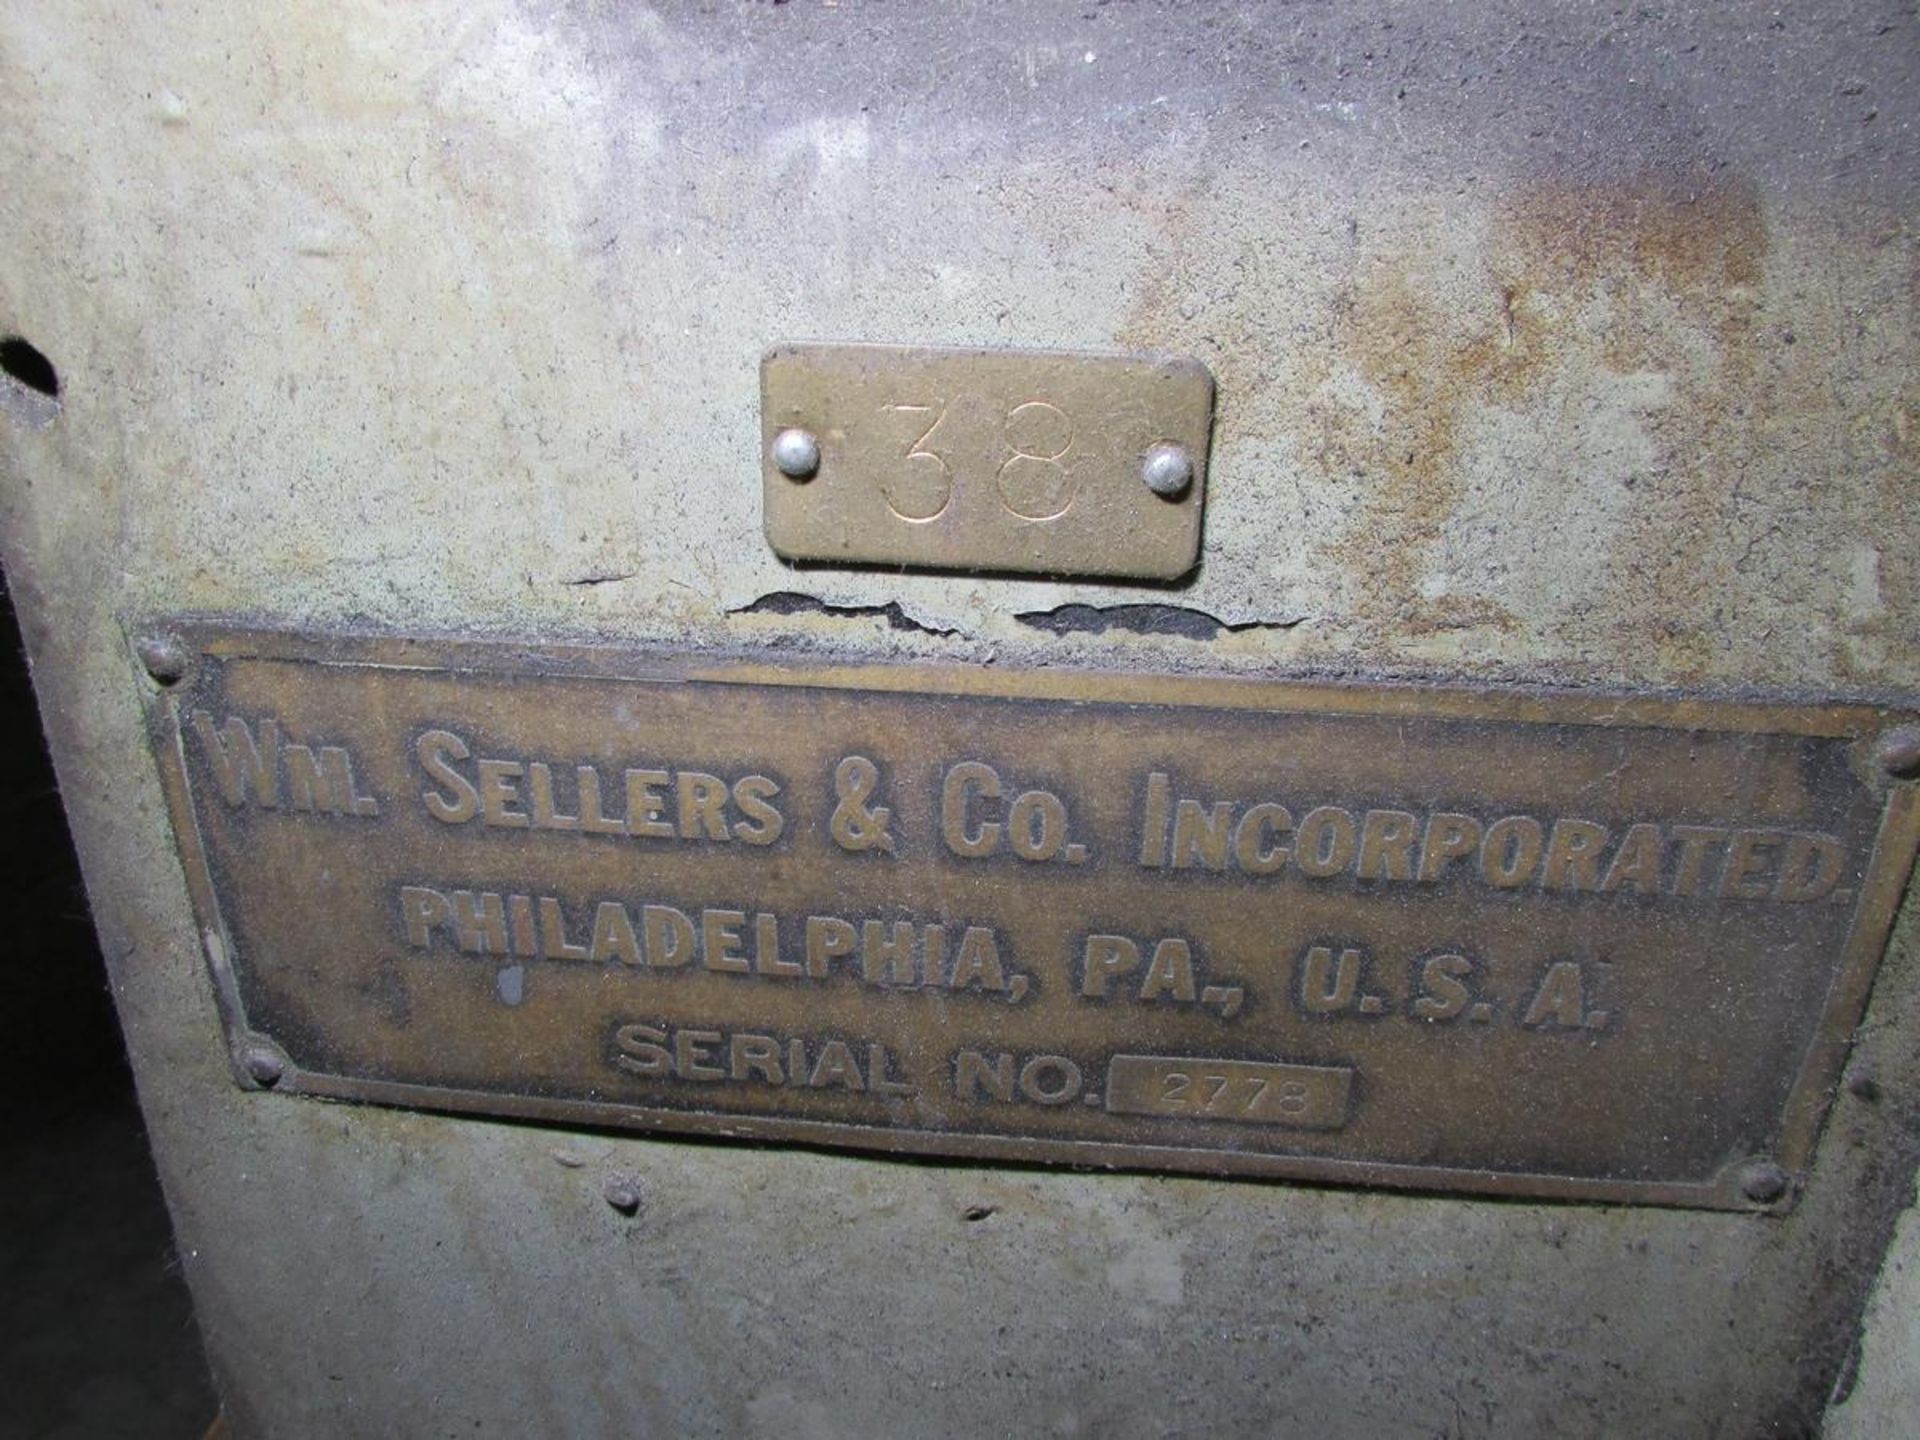 Sellers Drill Grinder - Image 6 of 6